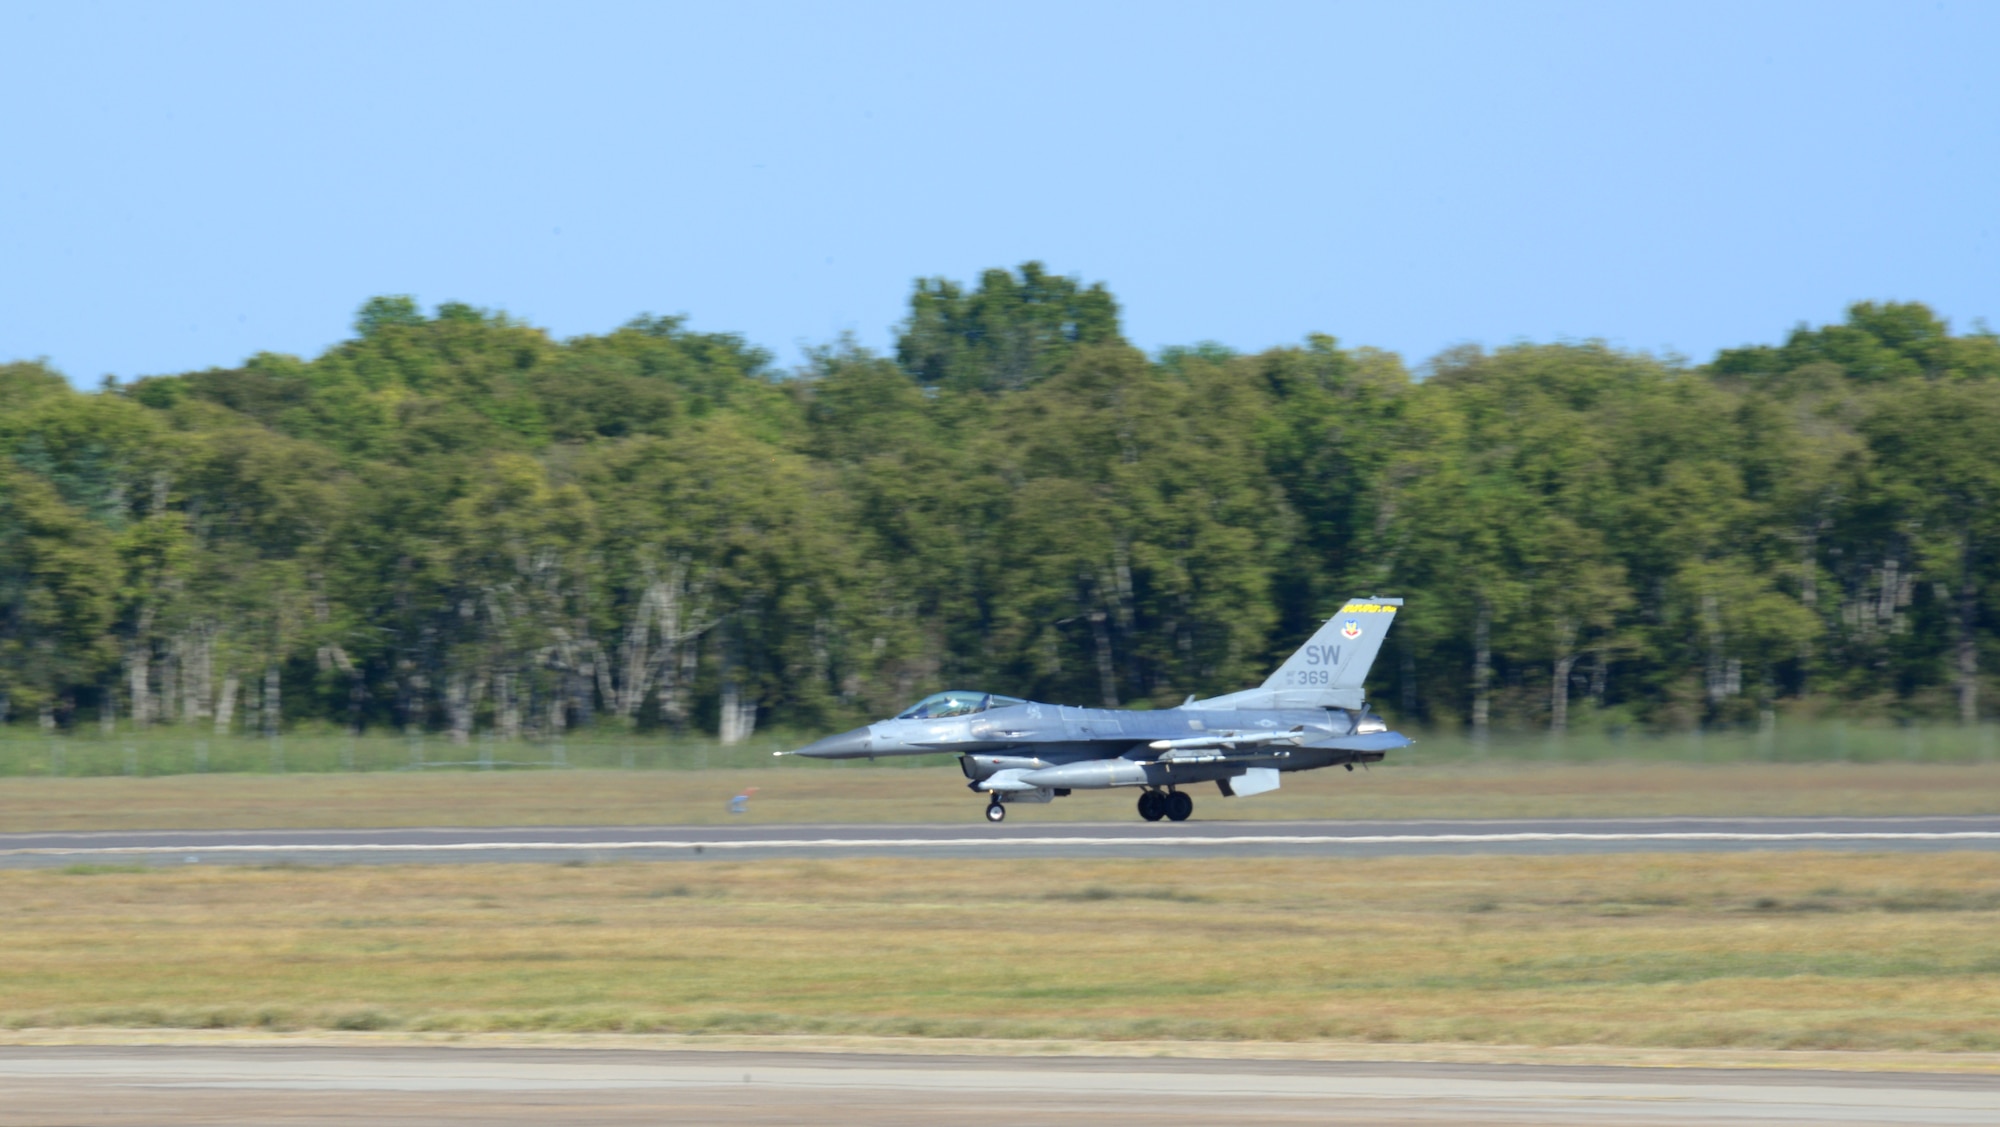 An F-16 Fighting Falcon lands on the flightline at Barksdale Air Force Base, La., Oct. 1, 2015. In an air combat role, the F-16's maneuverability and combat radius (distance it can fly to enter air combat, stay, fight and return) exceed that of all potential threat fighter aircraft. It can locate targets in all weather conditions and detect low flying aircraft in radar ground clutter. In an air-to-surface role, the F-16 can fly more than 500 miles (860 kilometers), deliver its weapons with superior accuracy, defend itself against enemy aircraft, and return to its starting point. An all-weather capability allows it to accurately deliver ordnance during non-visual bombing conditions. (U.S. Air Force photo/Airman 1st Class Curt Beach)